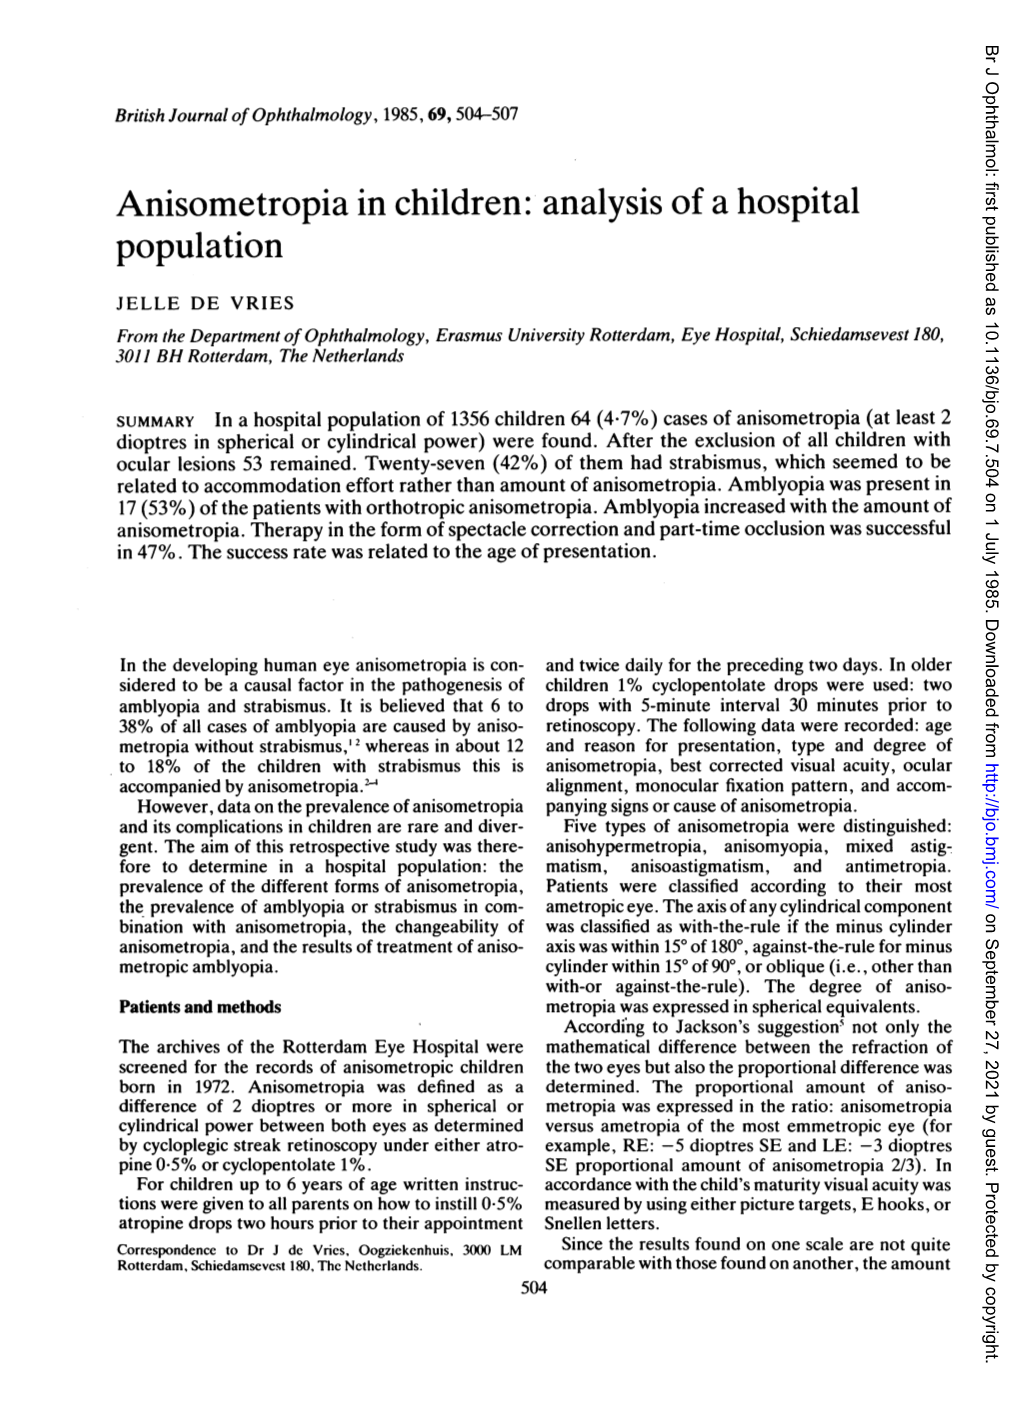 Anisometropia in Children: Analysis of a Hospital Population